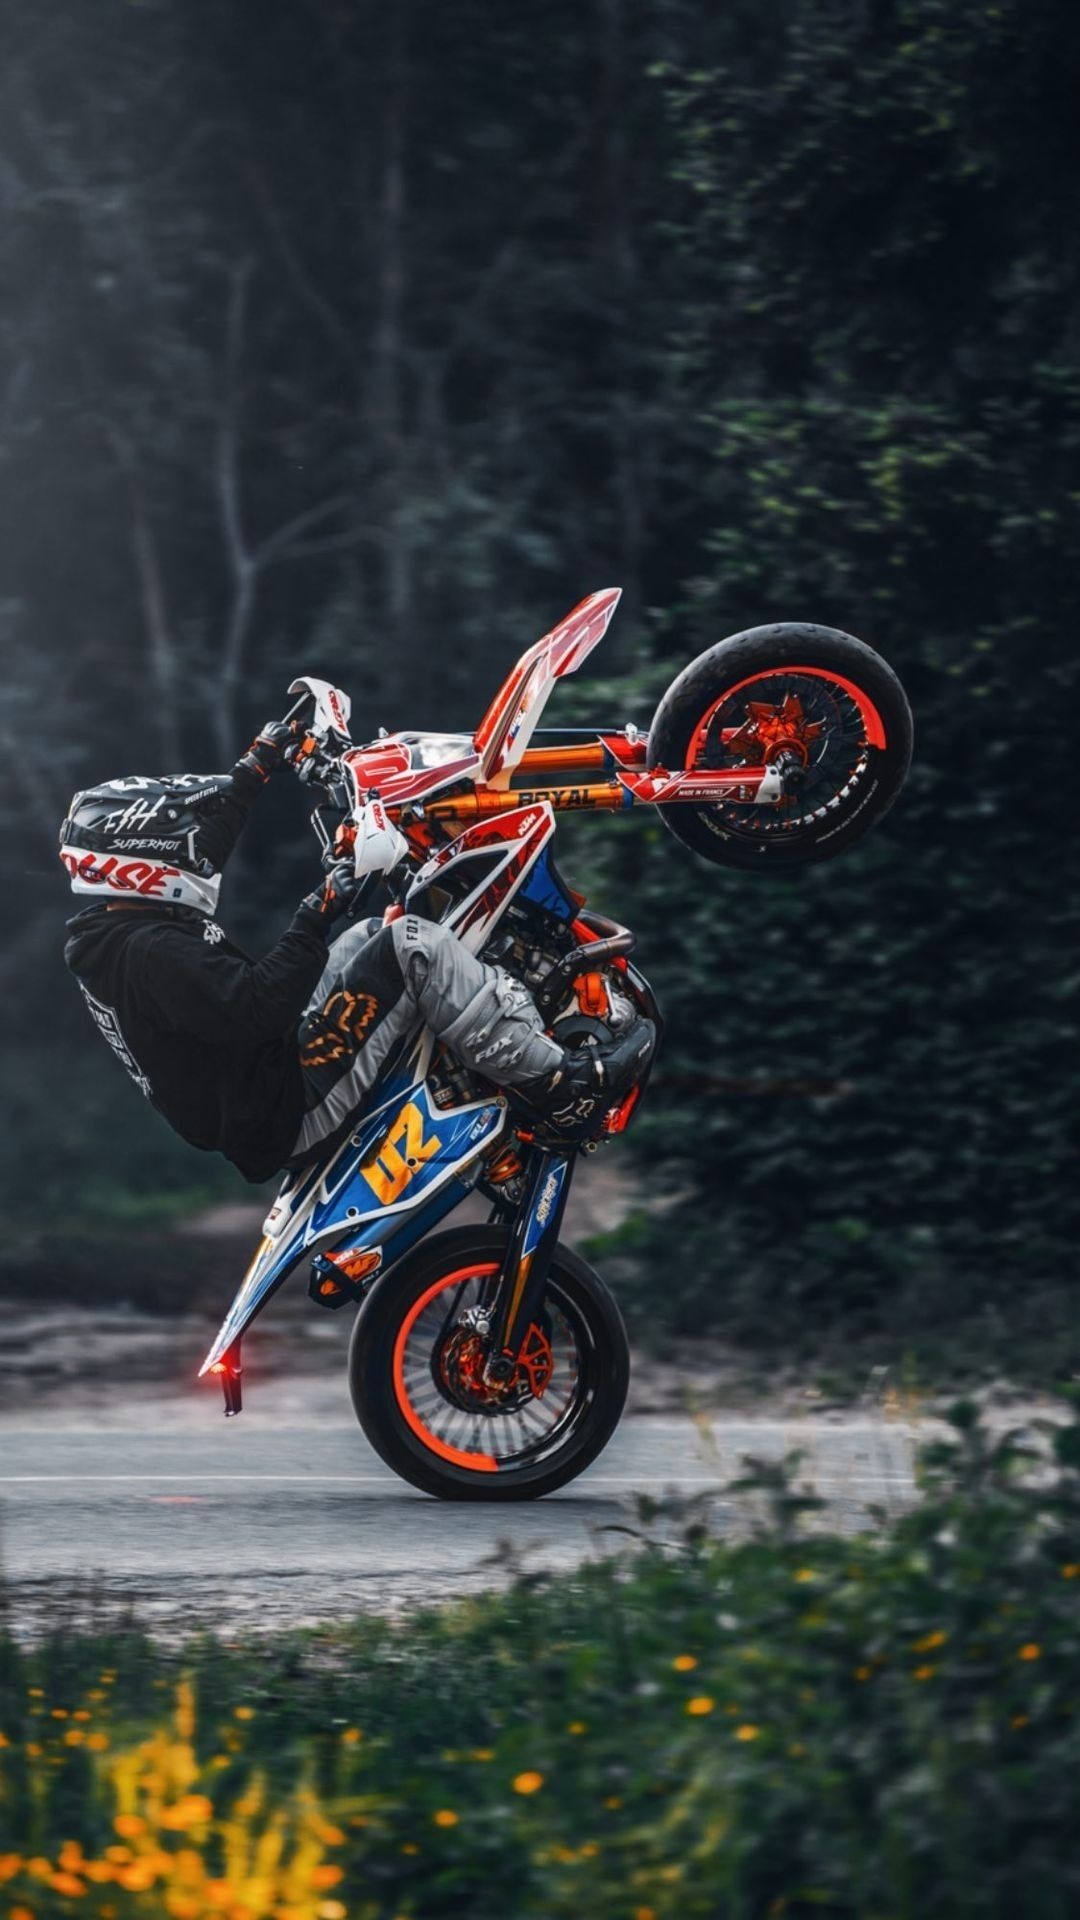 Supermoto: Wheelie, Stunts on the track, National champions, The spirit of the competition. 1080x1920 Full HD Background.